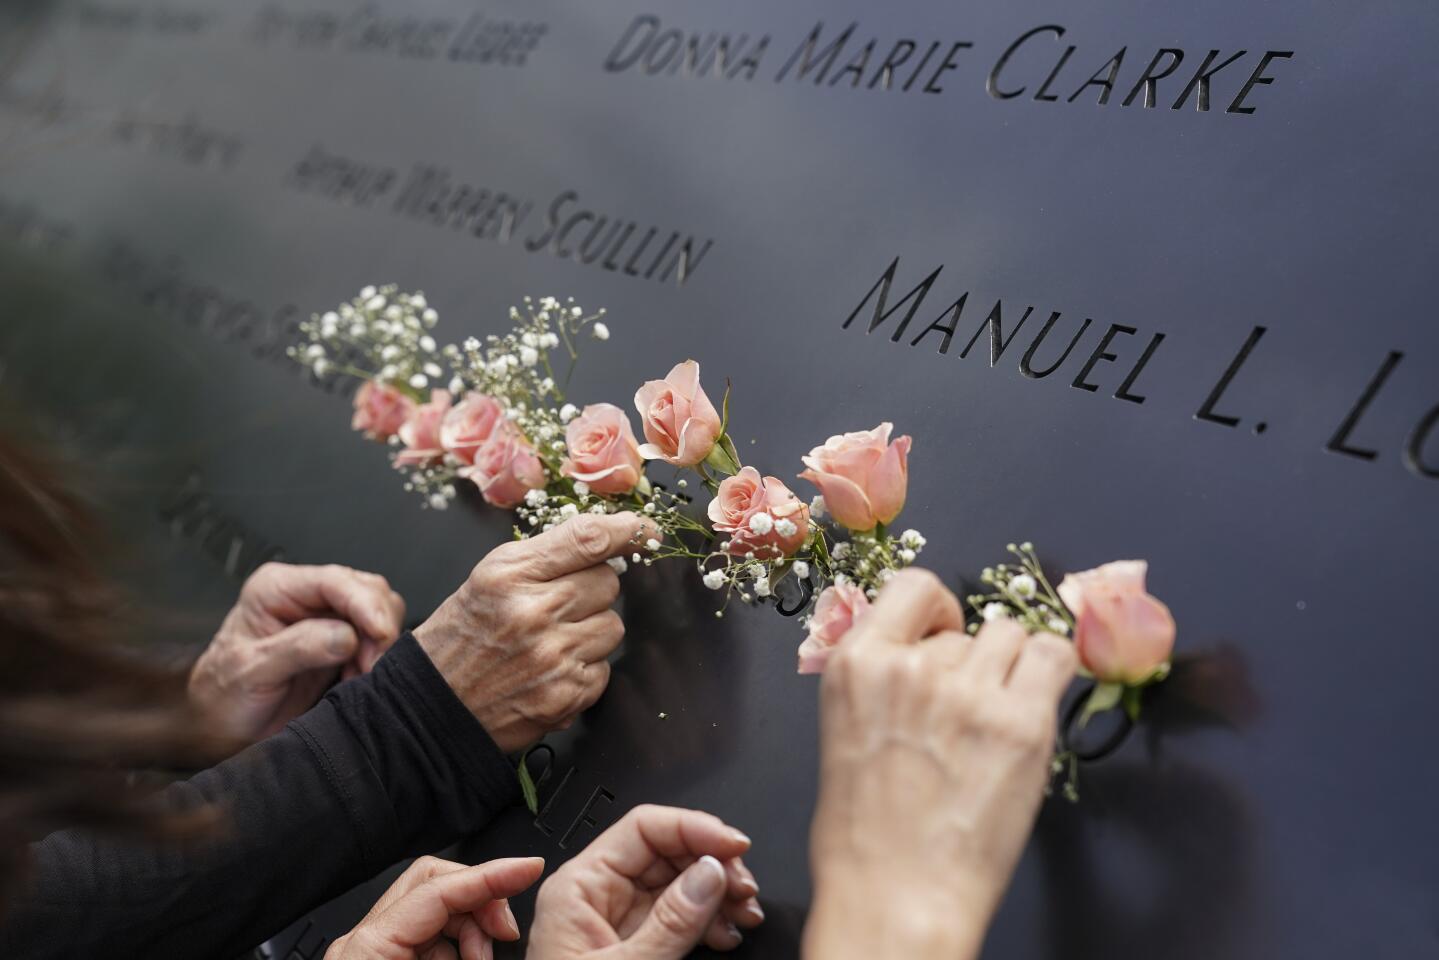 Mourners place flowers in the cut-out name of Kyung Hee "Casey" Cho at the National September 11 Memorial in New York.